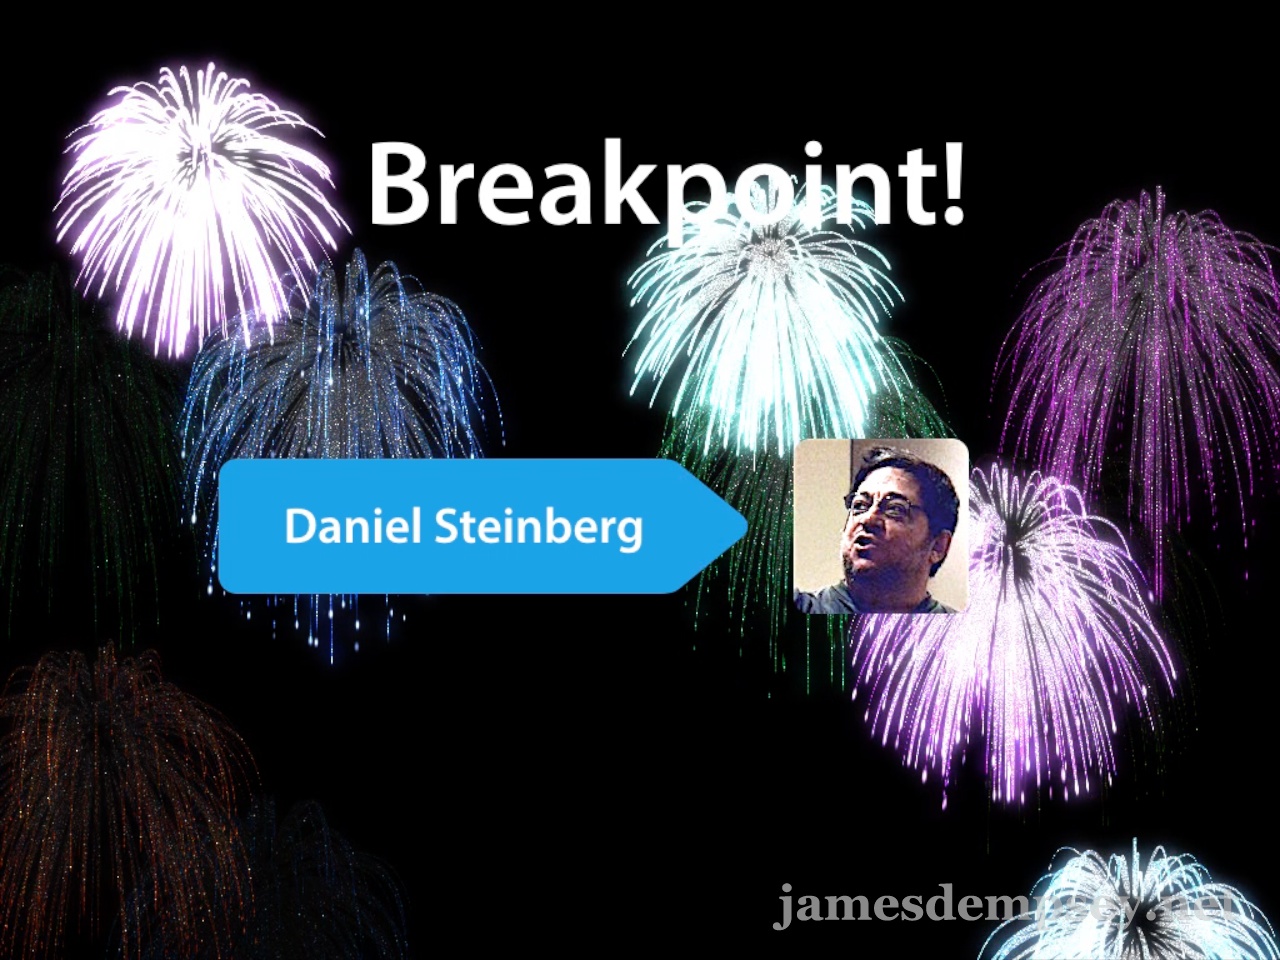 Image of fireworks behind Daniel Steinberg's name and photo to celebrate his induction into the Breakpoints